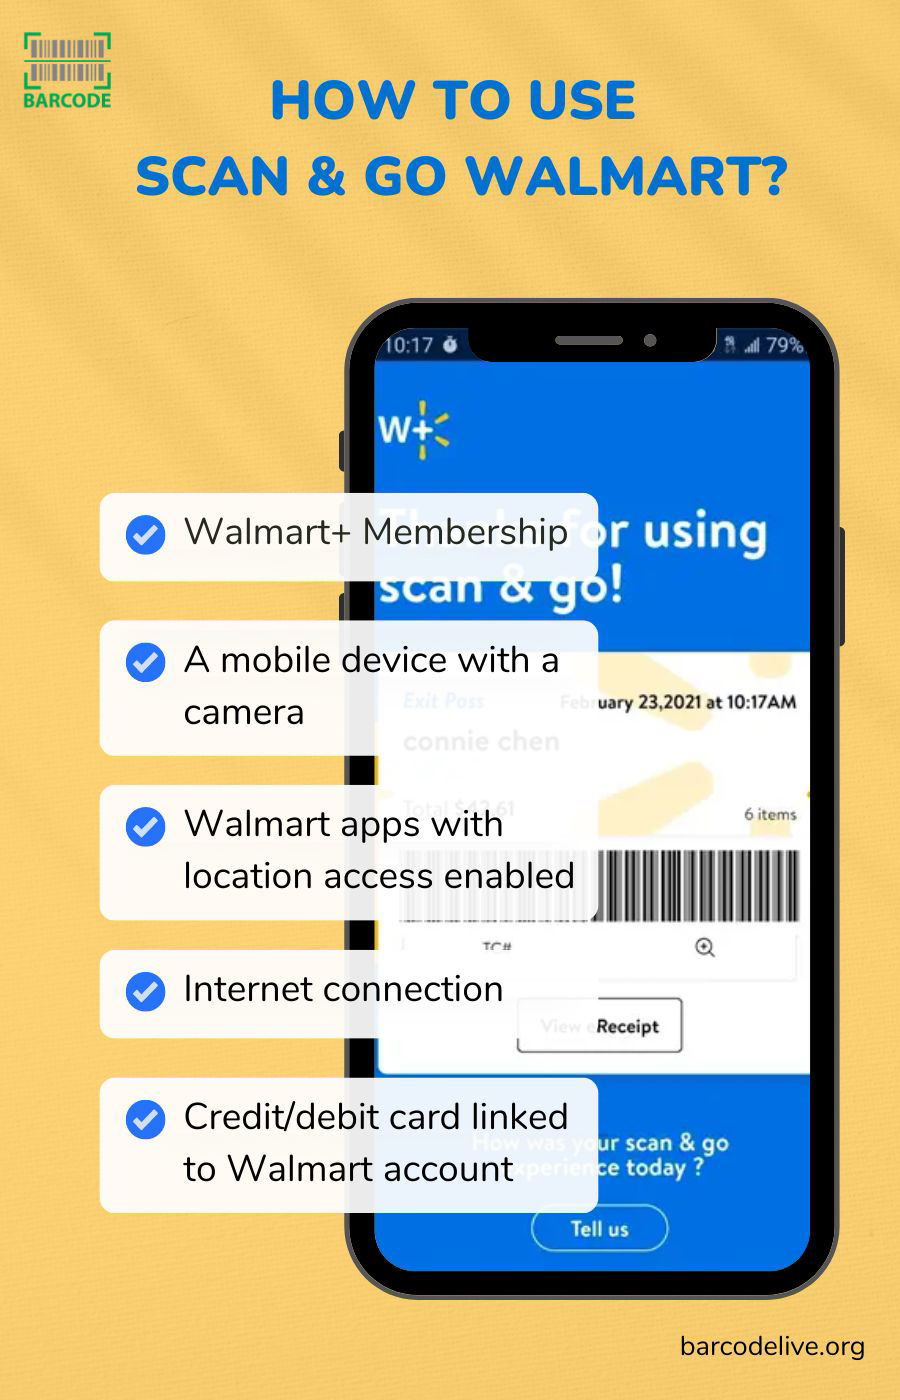 Things you need to use Scan and Go Walmart